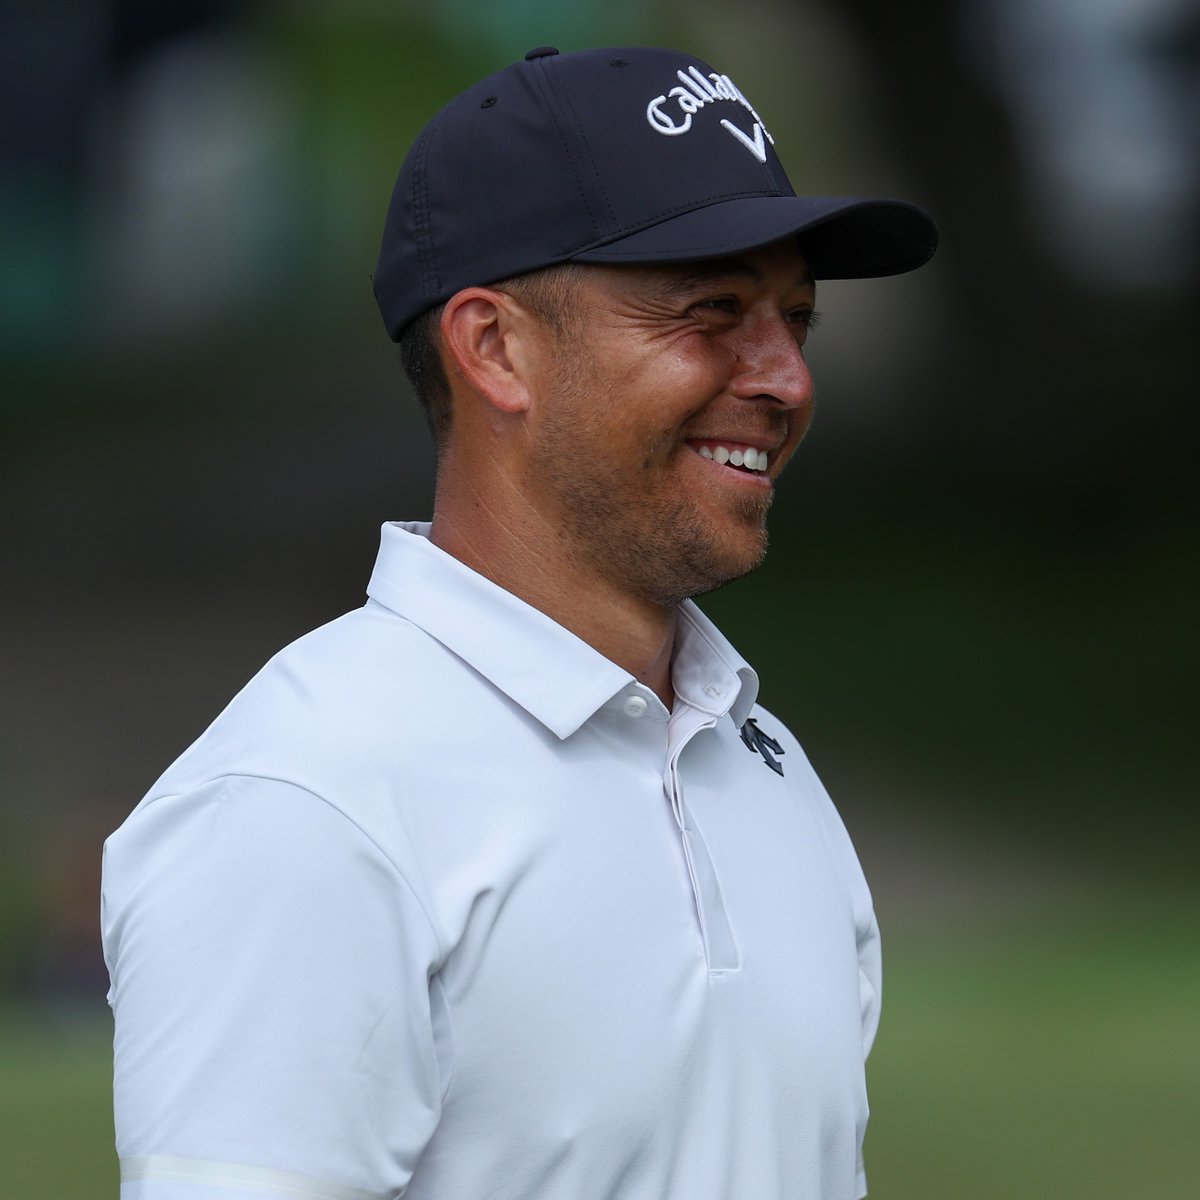 Xander Schauffele (-9) has the solo lead after Round 1 at the PGA Championship. ⛳ Do you think he holds on to win? 🤔